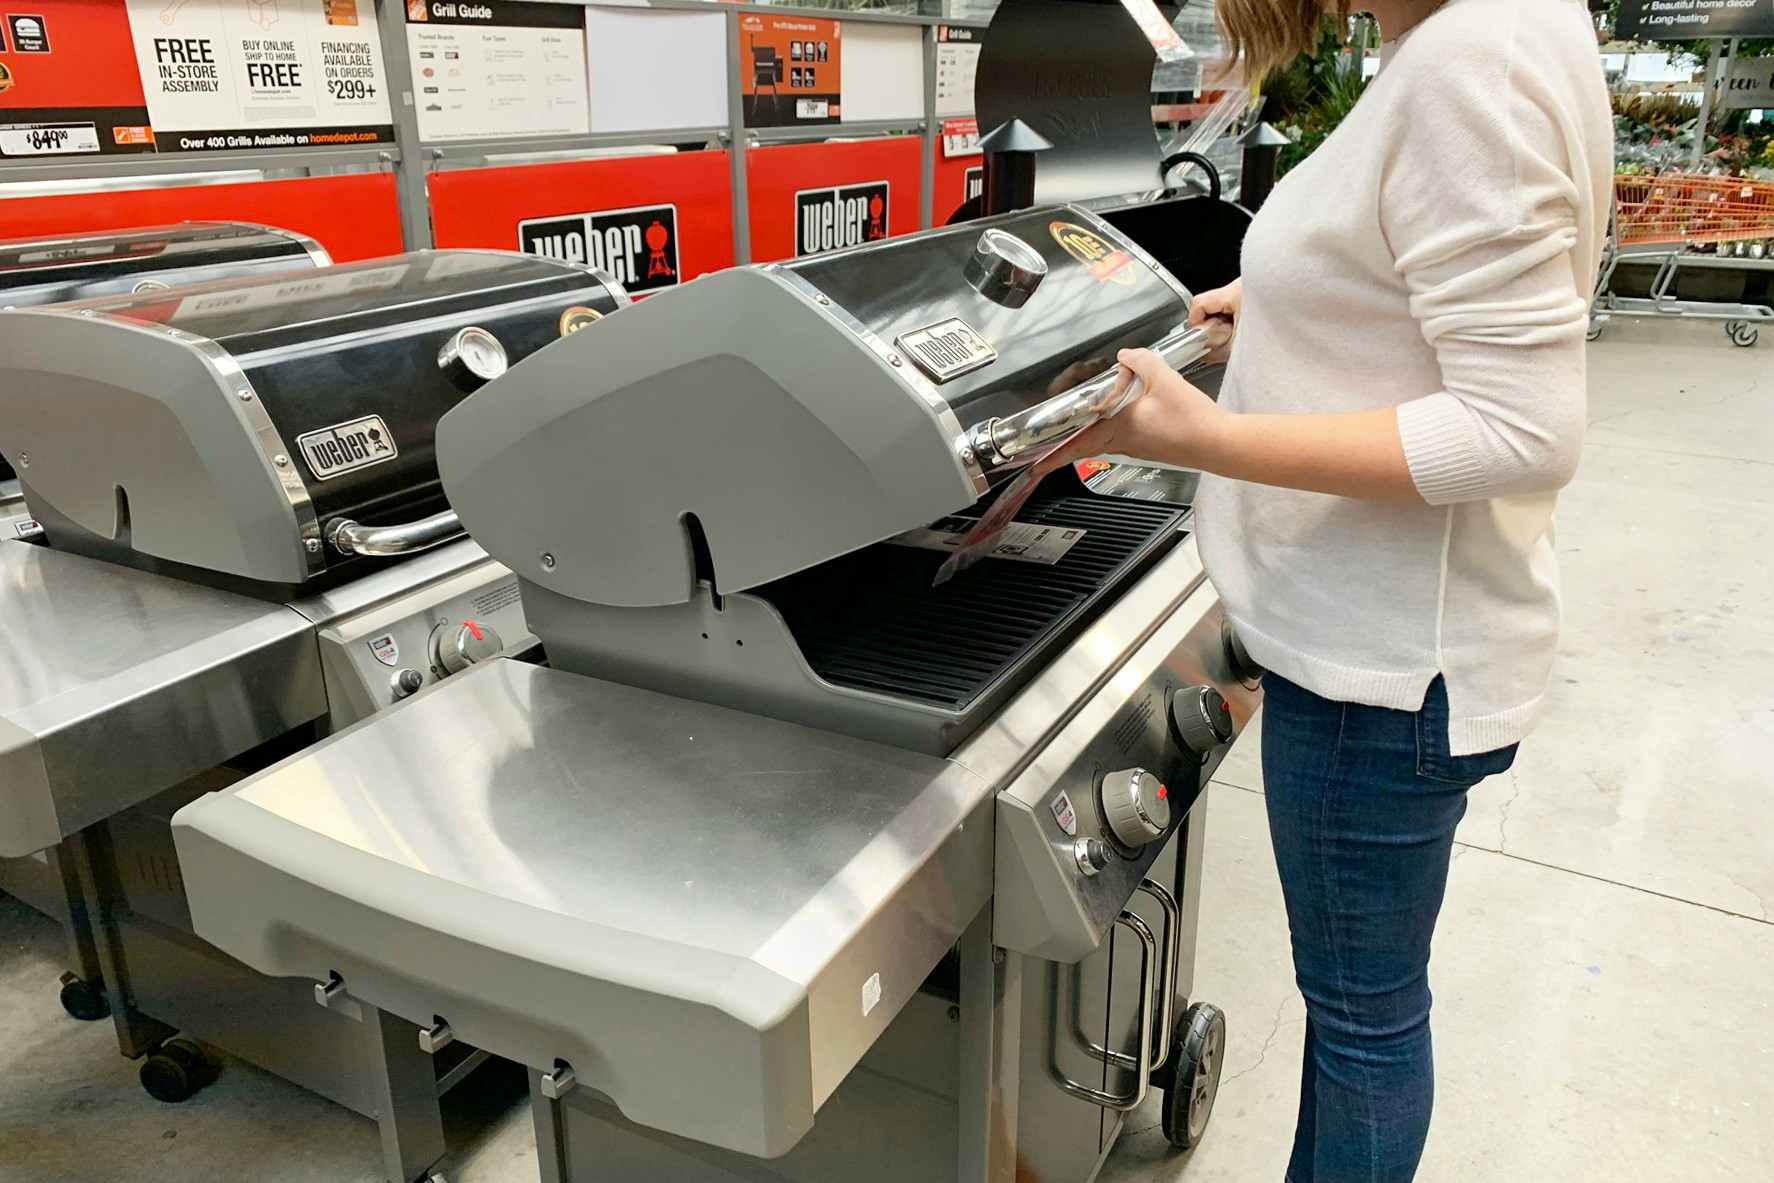 A woman looking at a grill in The Home Depot garden center.